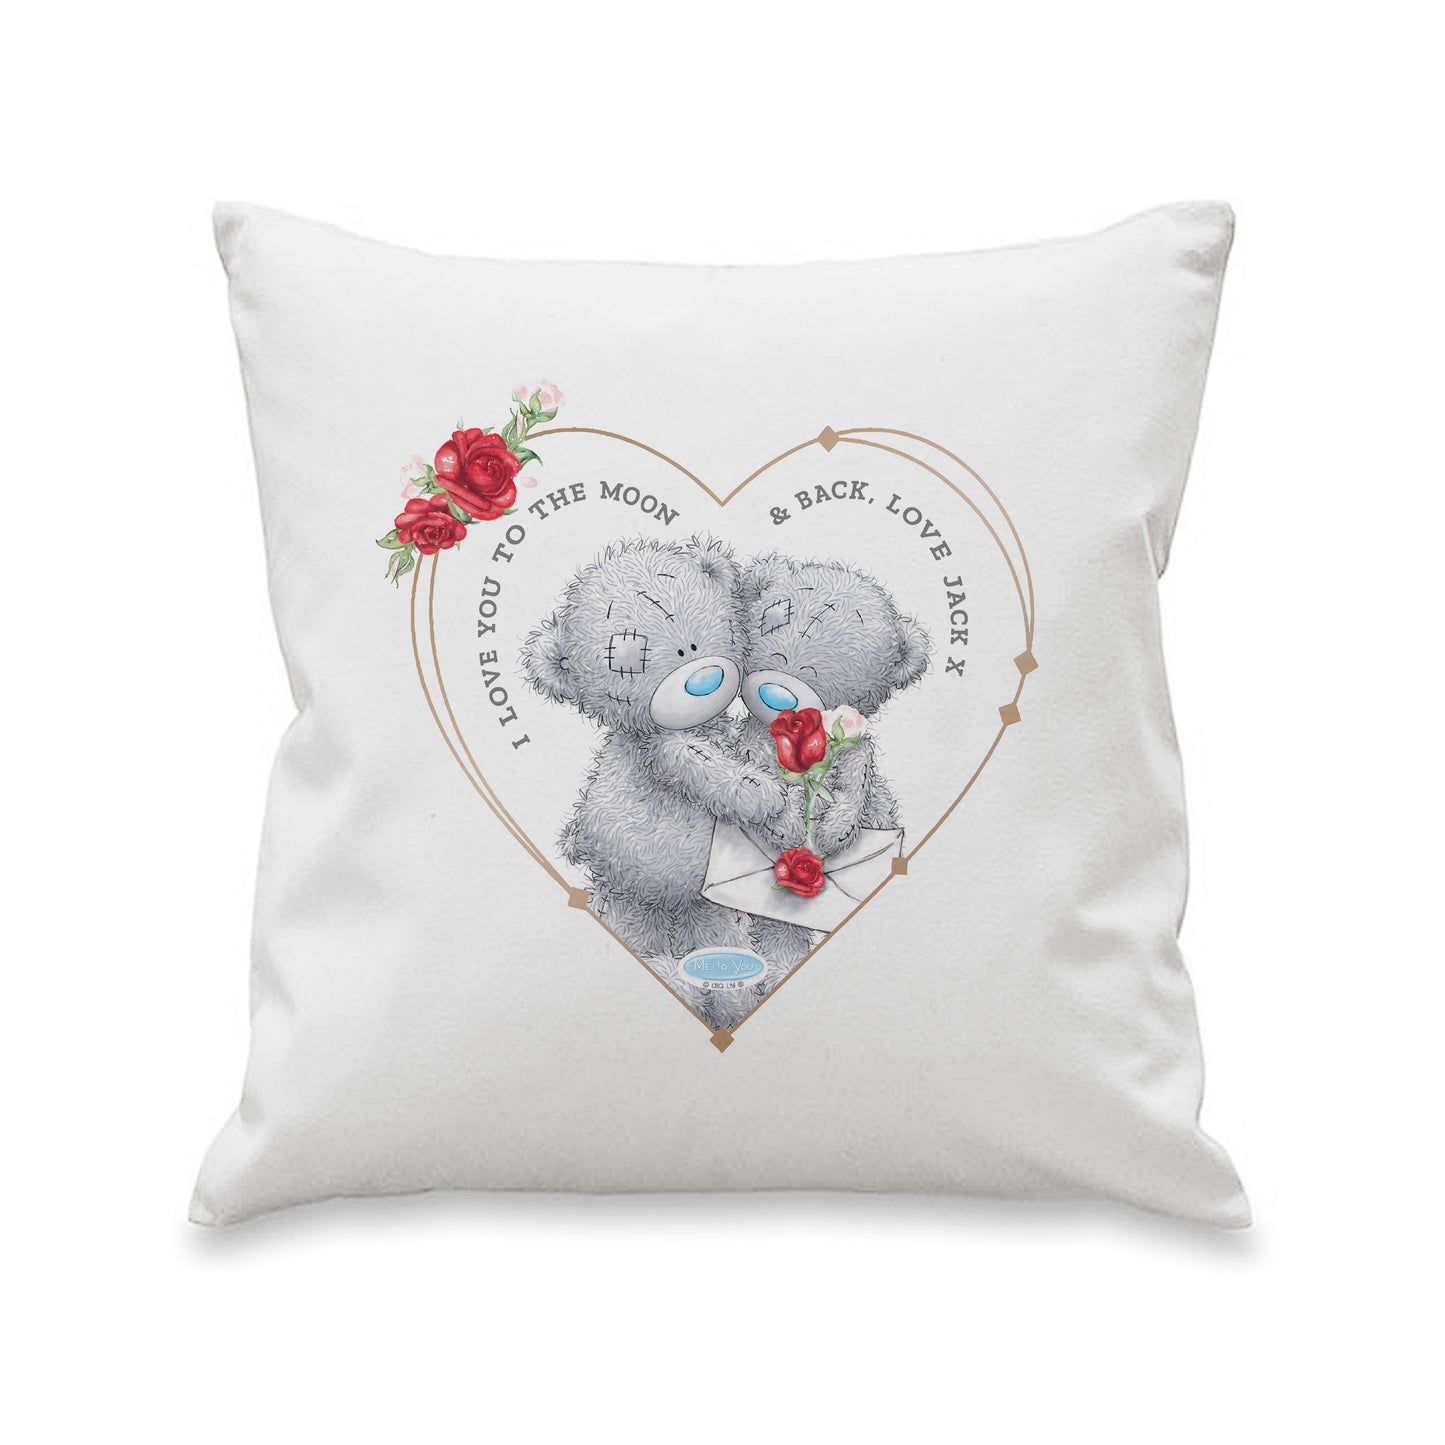 Personalised Me to You Valentine Cushion Cover - Personalise It!